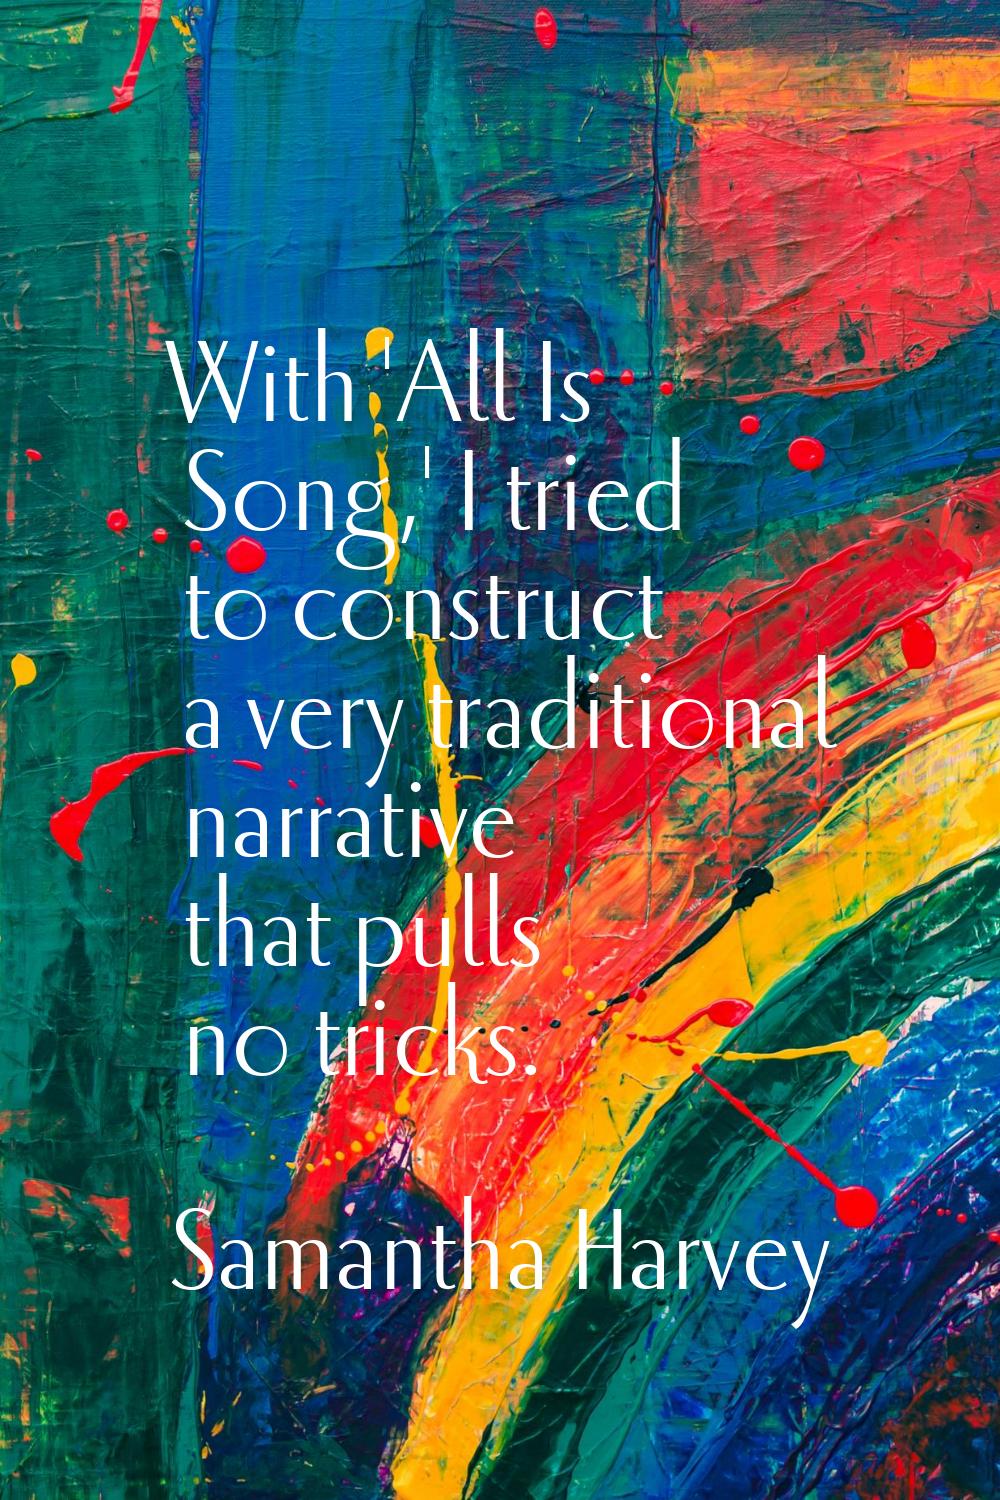 With 'All Is Song,' I tried to construct a very traditional narrative that pulls no tricks.